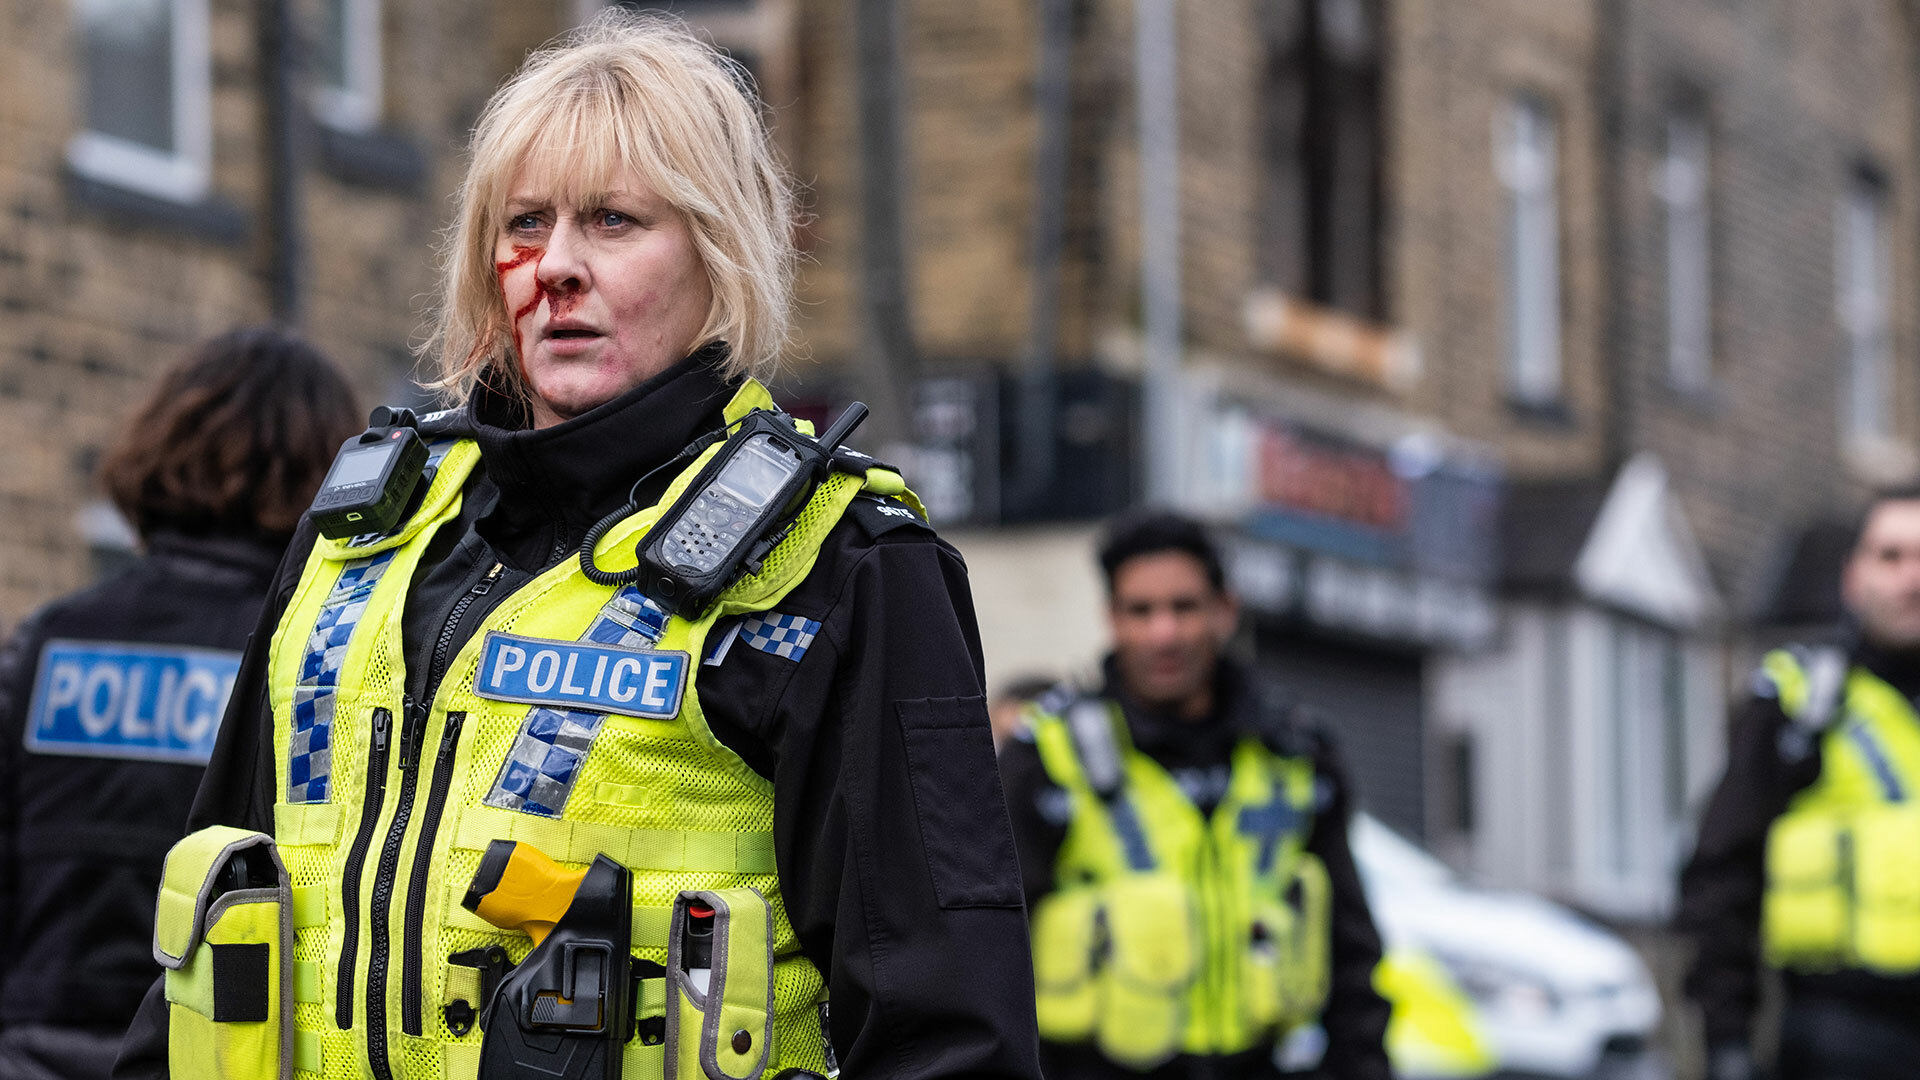 A police officer with blood on her face stands in the road with other police offers in the background.